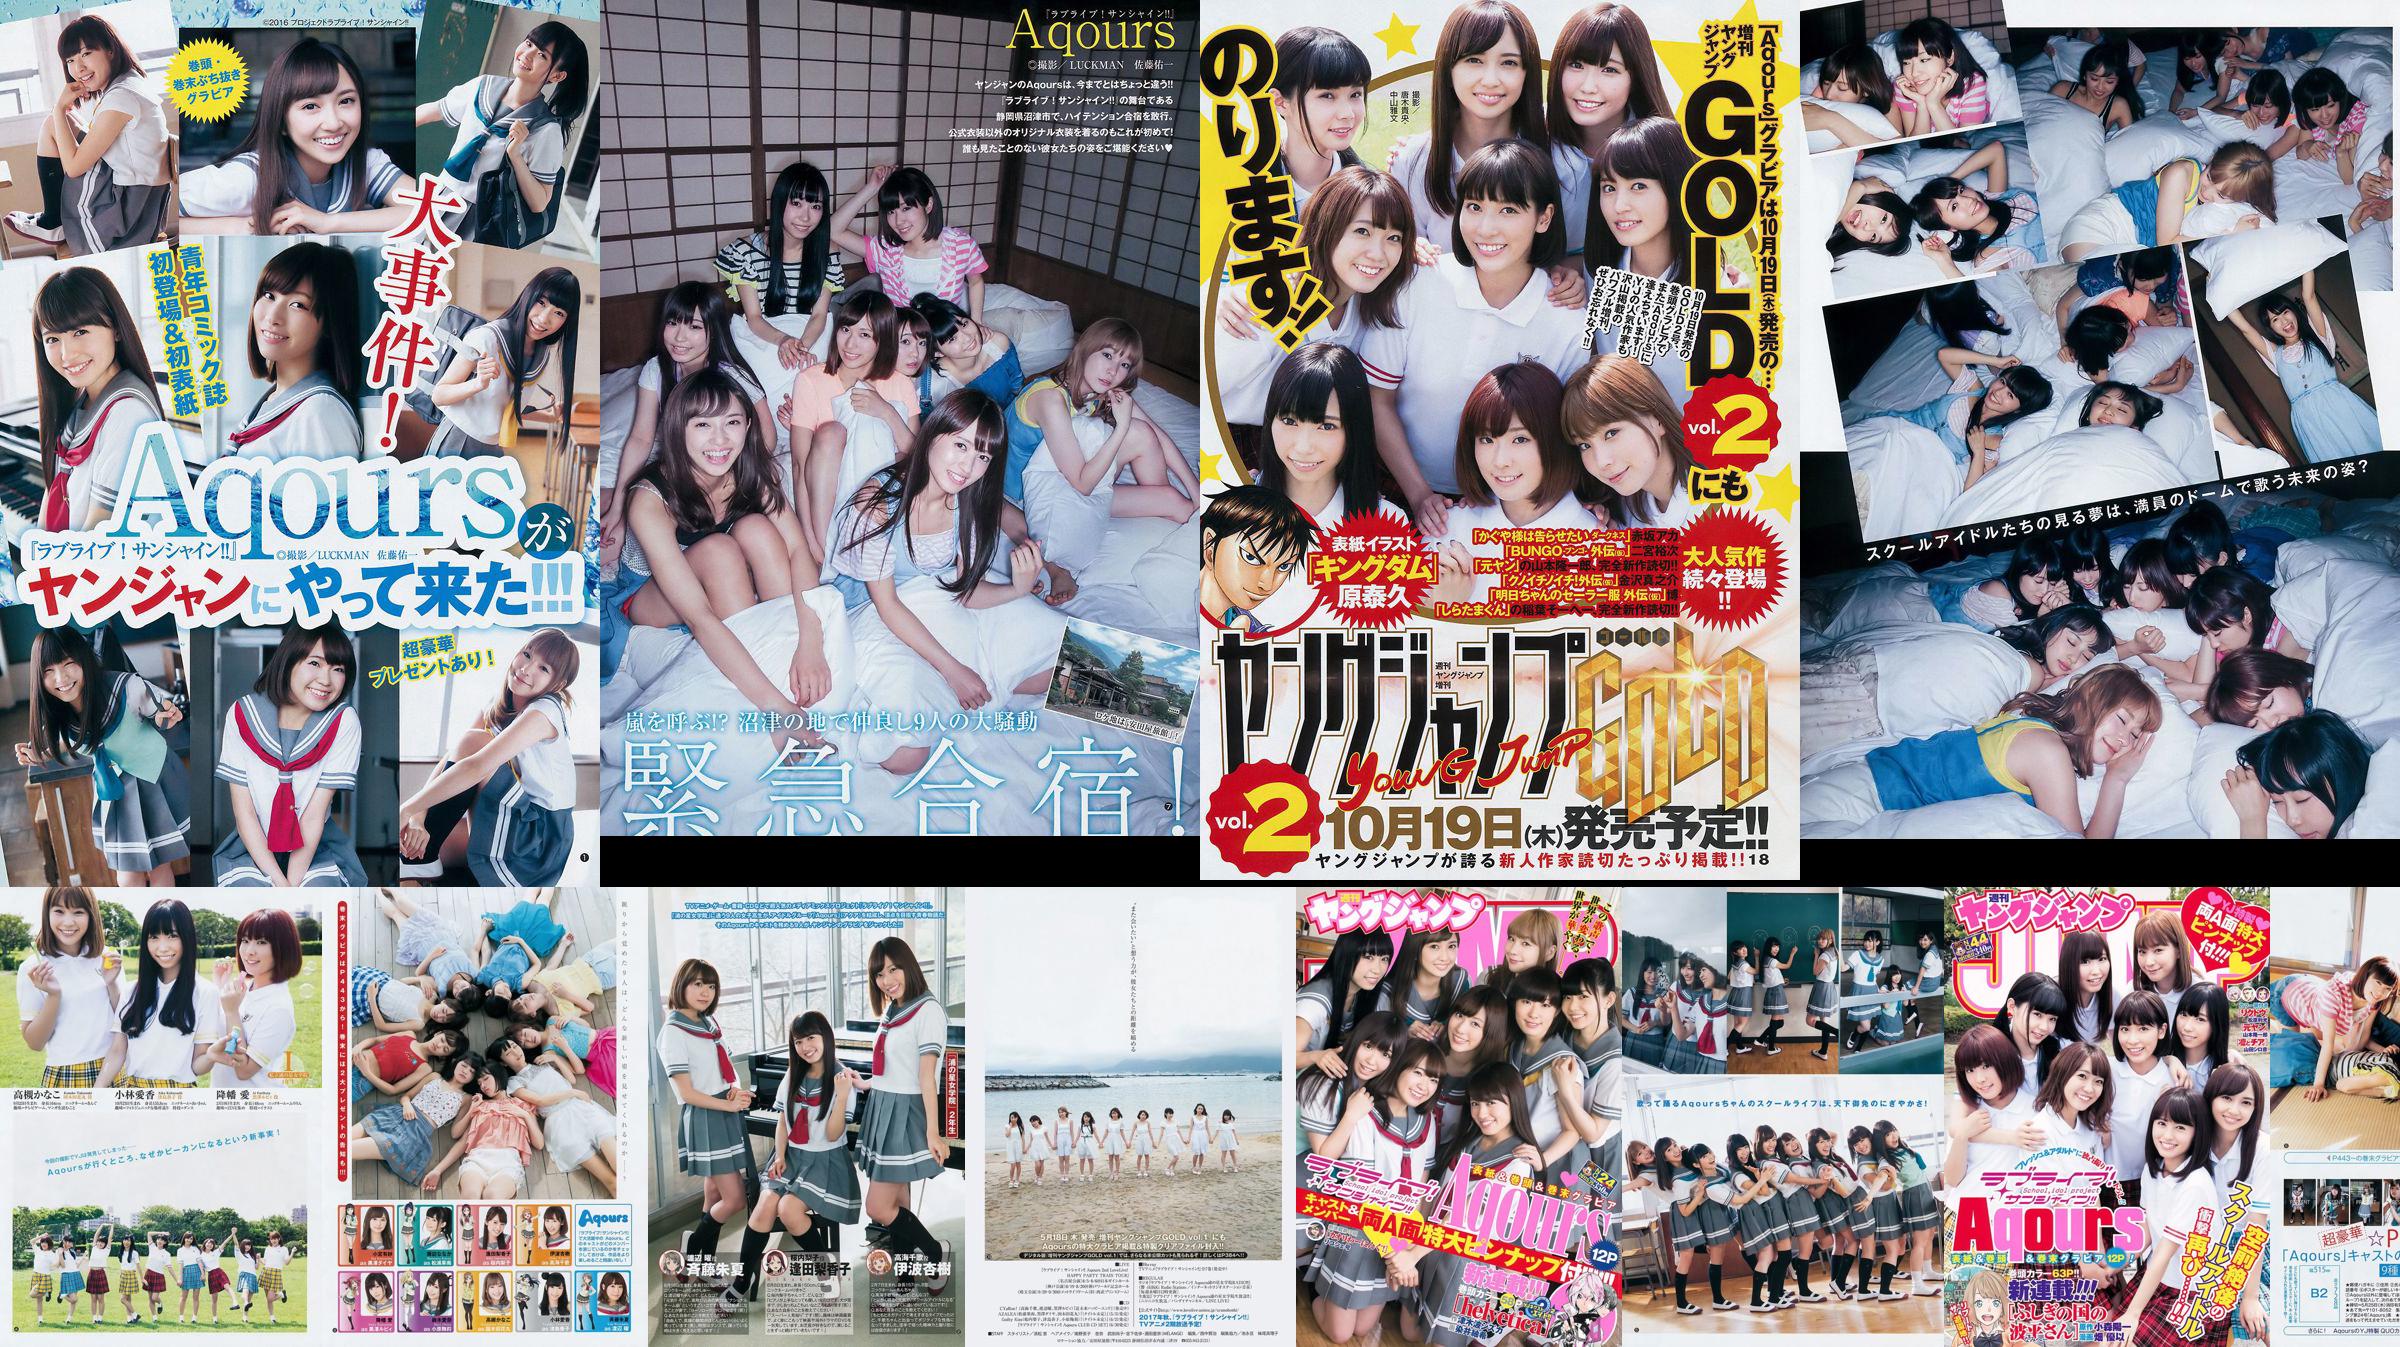 Japan Combination Aqours [Weekly Young Jump] 2017 No.44 Photo Magazine No.72759e หน้า 1